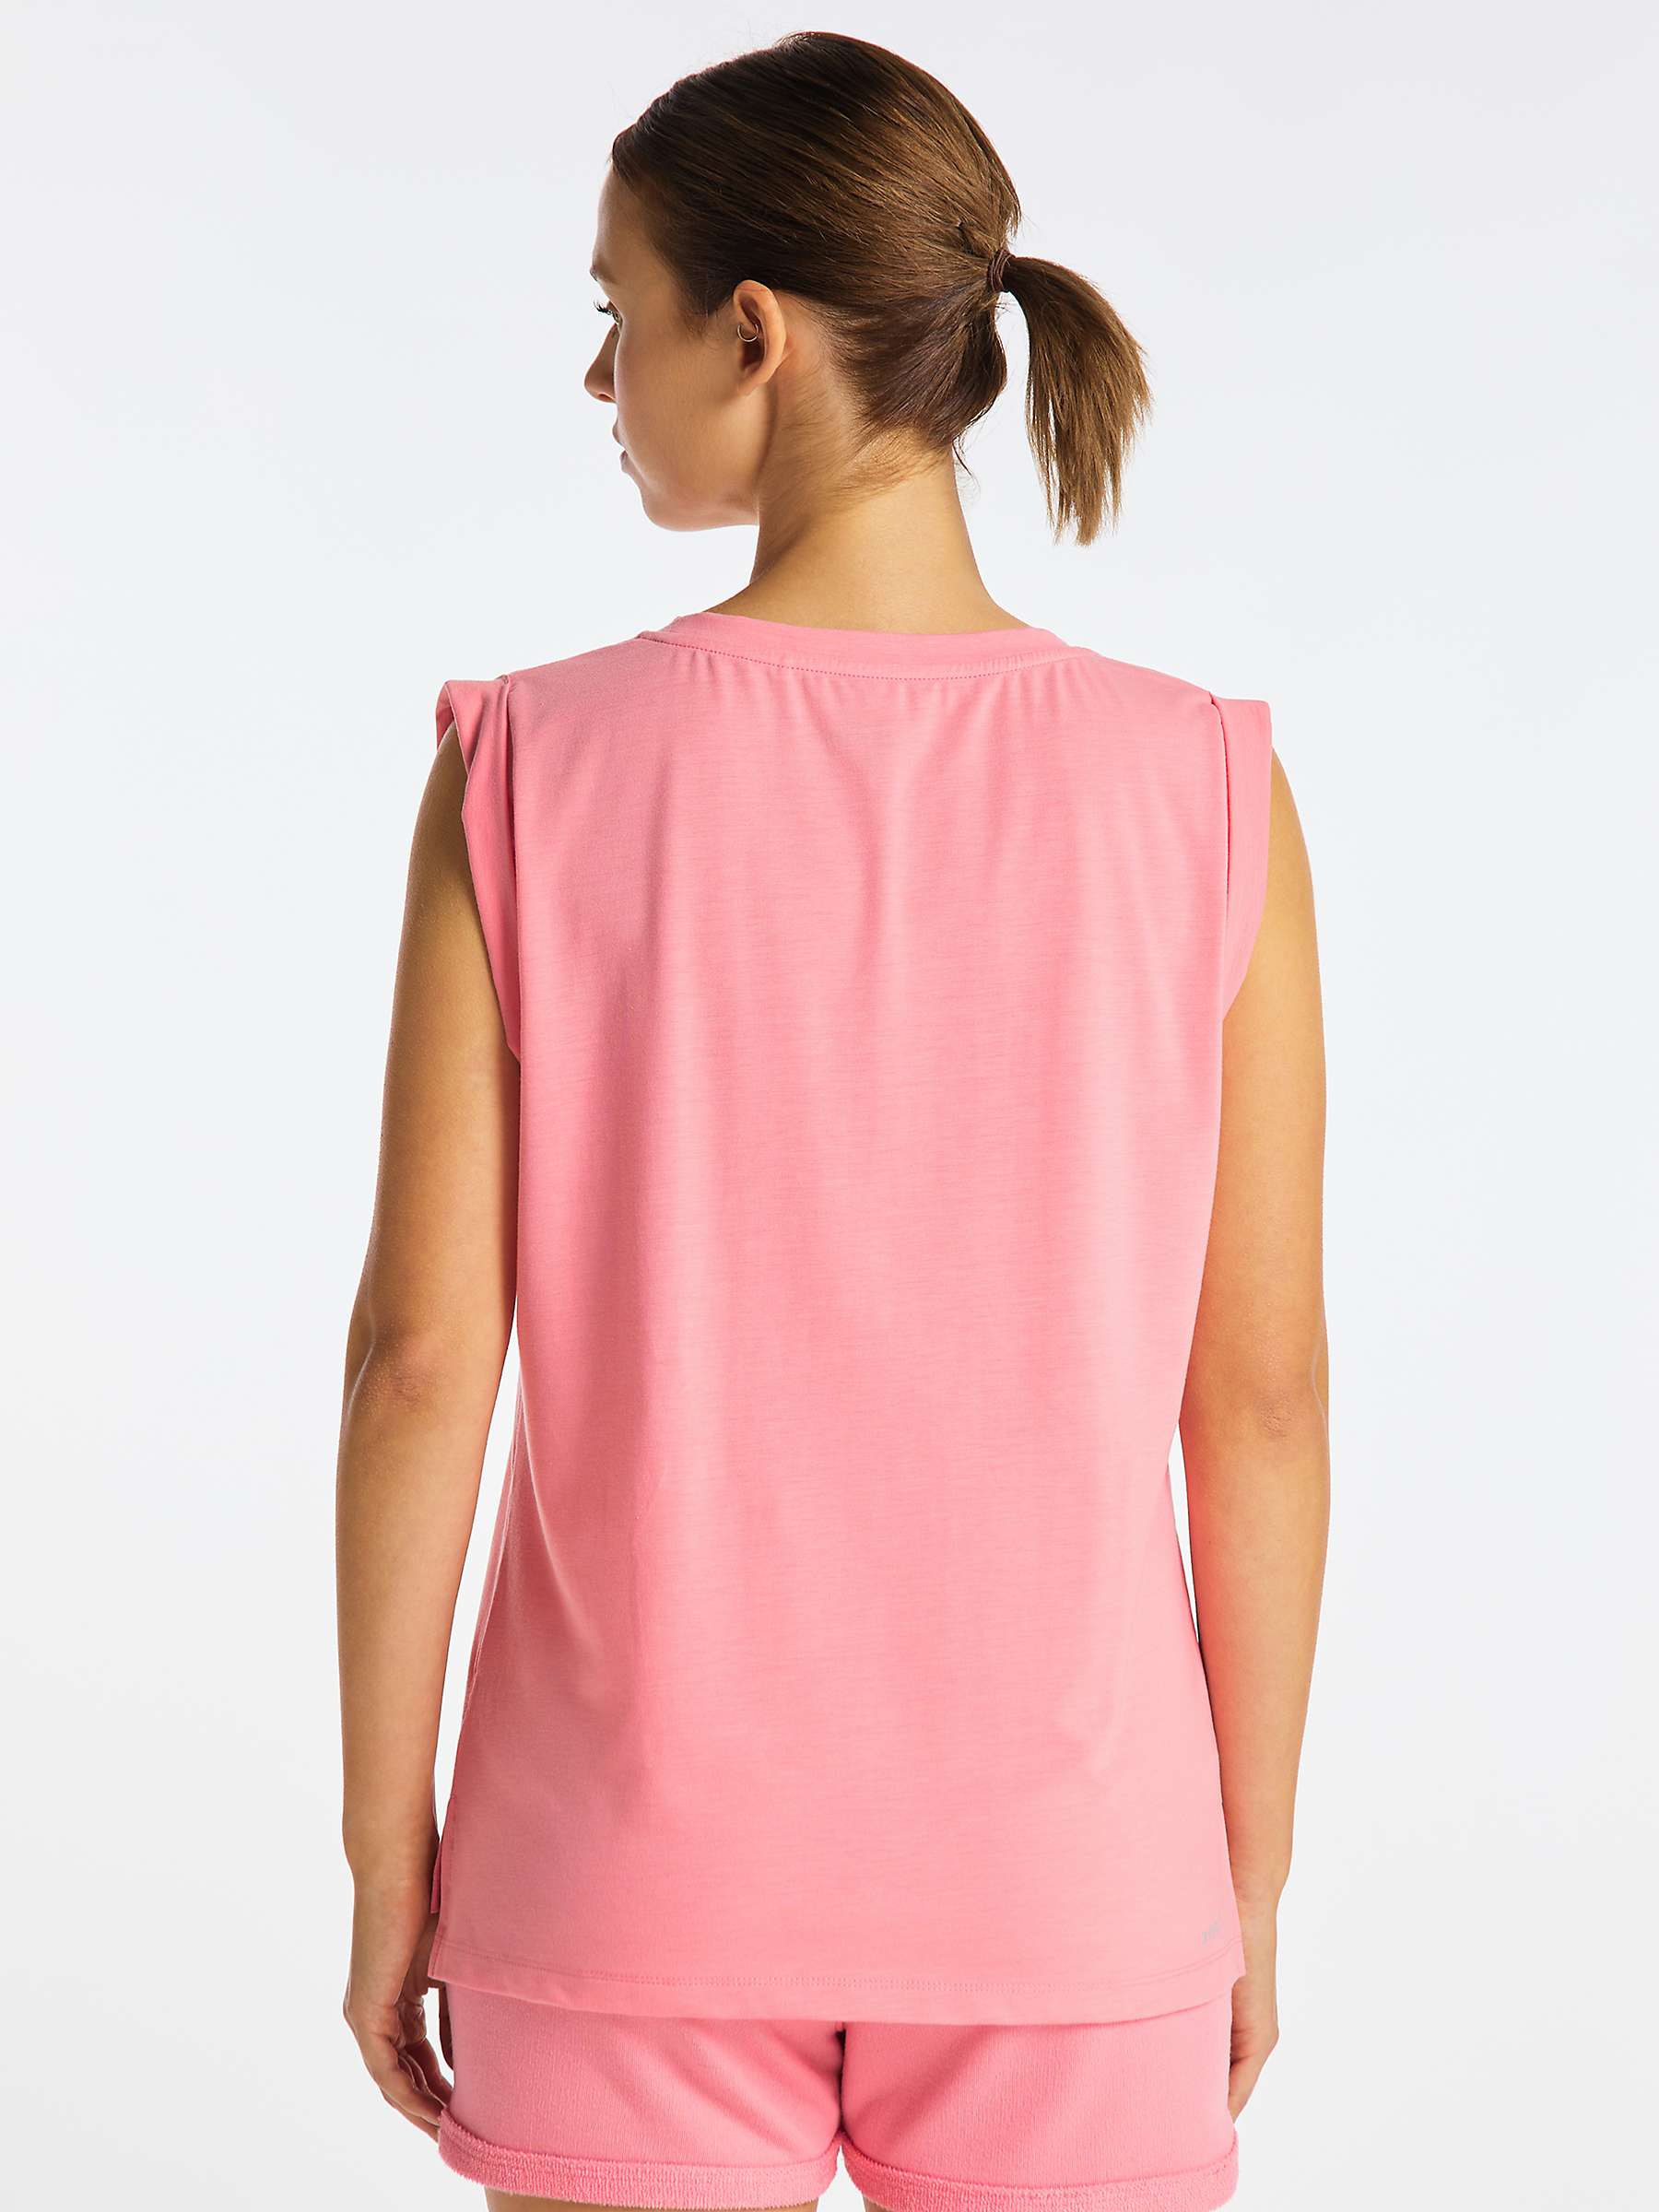 Buy Venice Beach Chayanne Sleeveless Gym Top Online at johnlewis.com